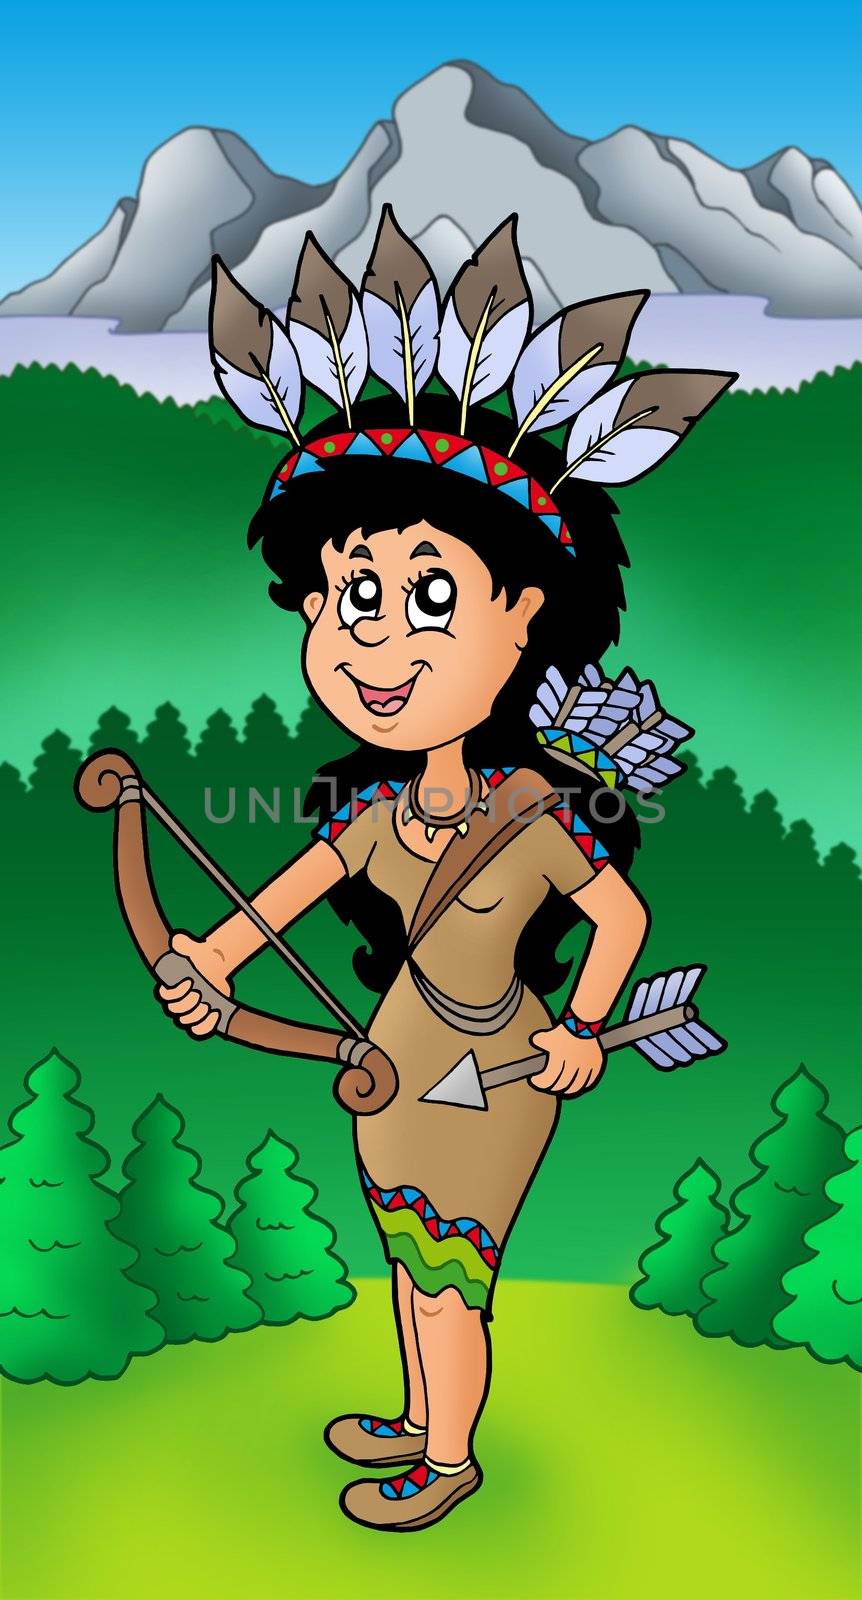 Native American Indian girl on meadow - color illustration.